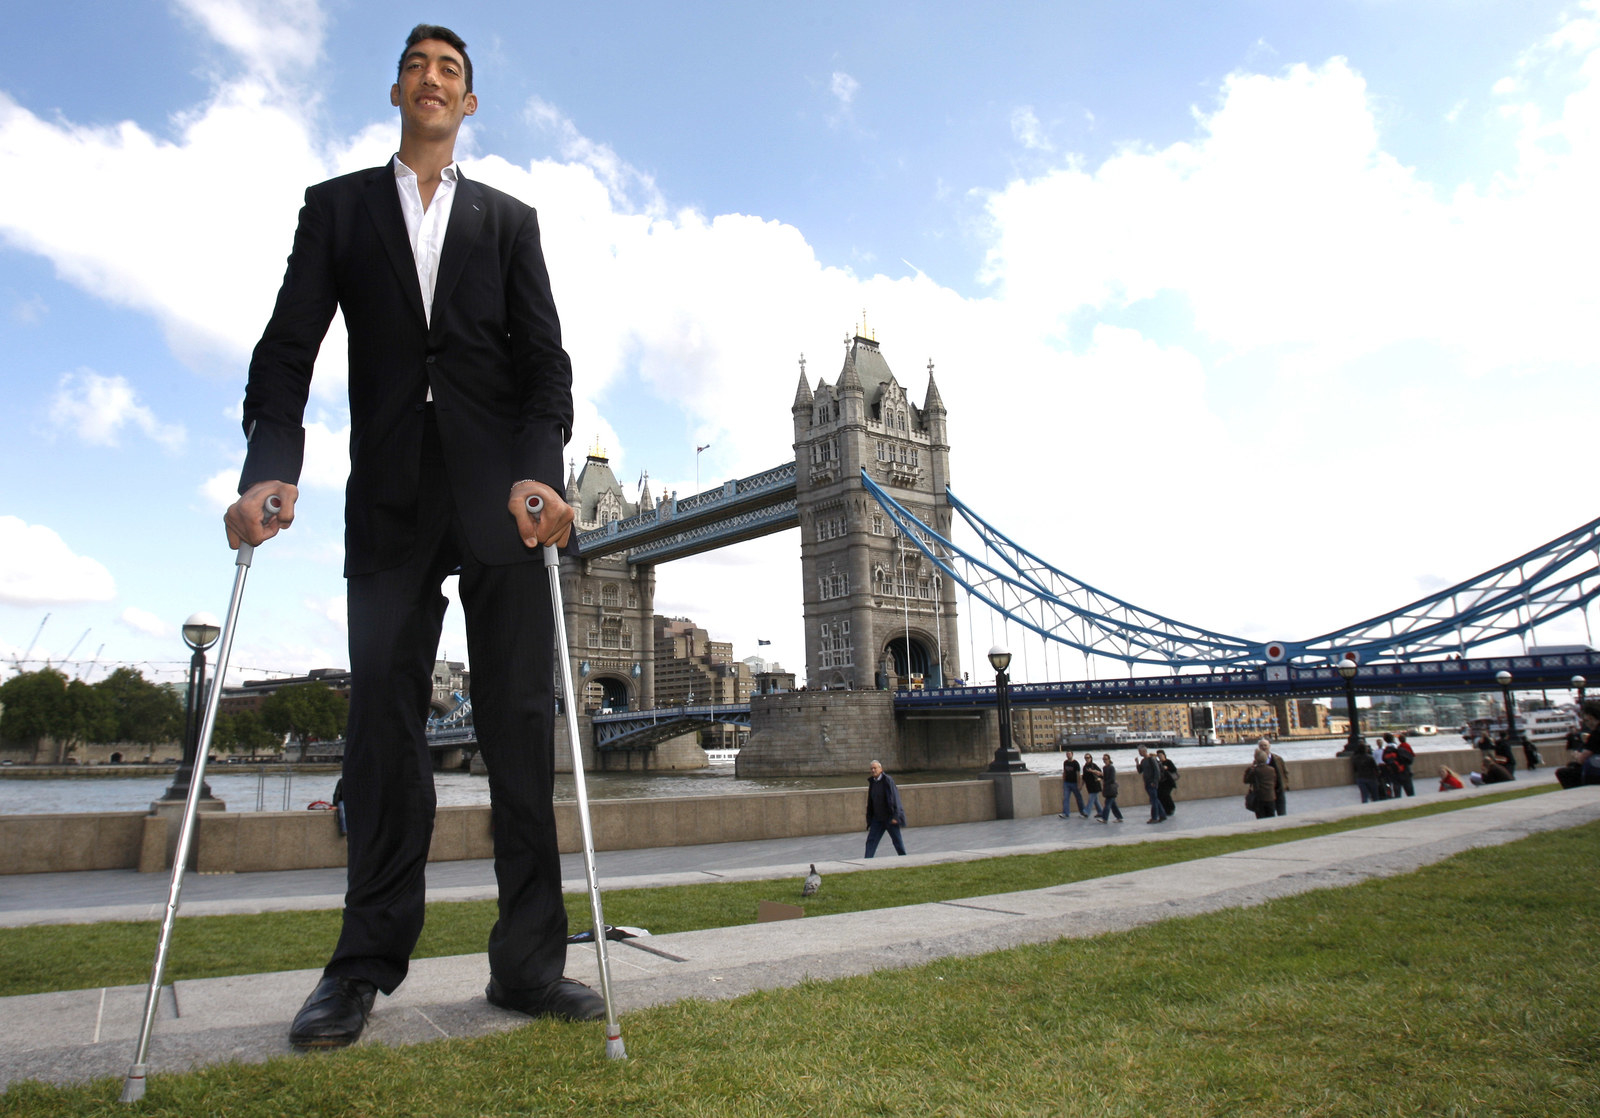 Tallest Man In India Says He's Looking For Wife, But Can't Find